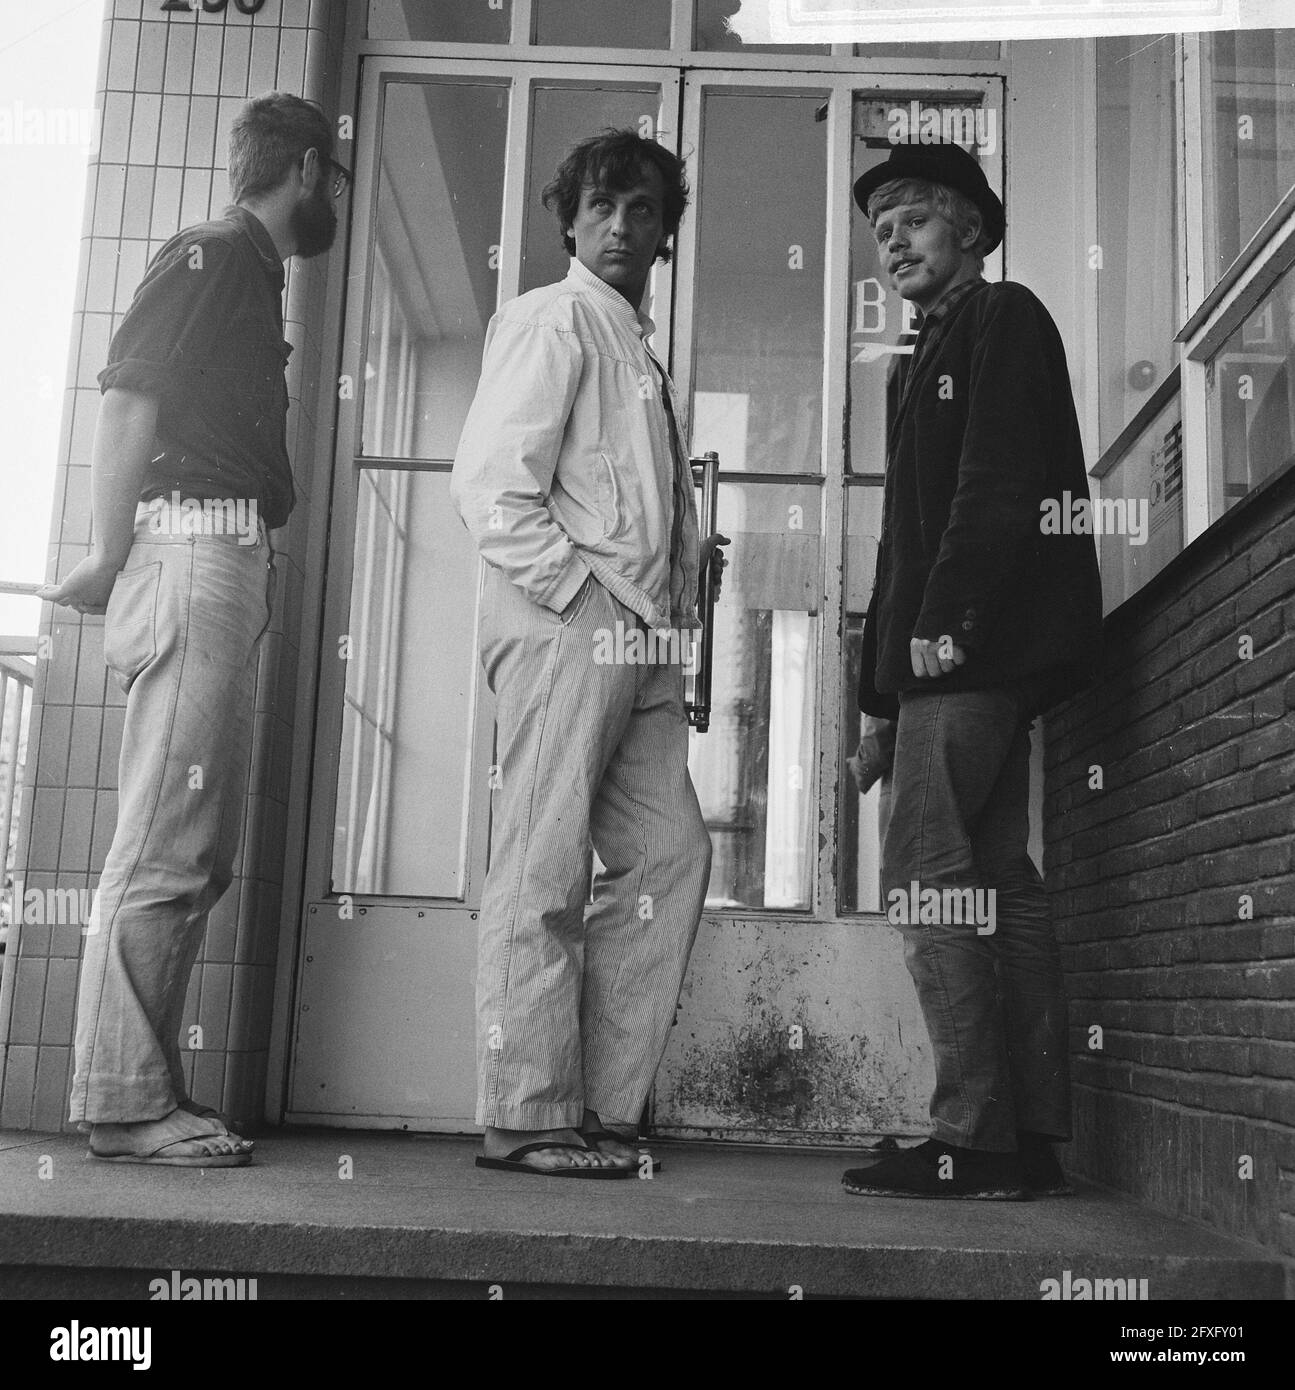 From left to right Van Duyn, Grootveld and Stolk, 14 August 1965, activists, police, The Netherlands, 20th century press agency photo, news to remember, documentary, historic photography 1945-1990, visual stories, human history of the Twentieth Century, capturing moments in time Stock Photo